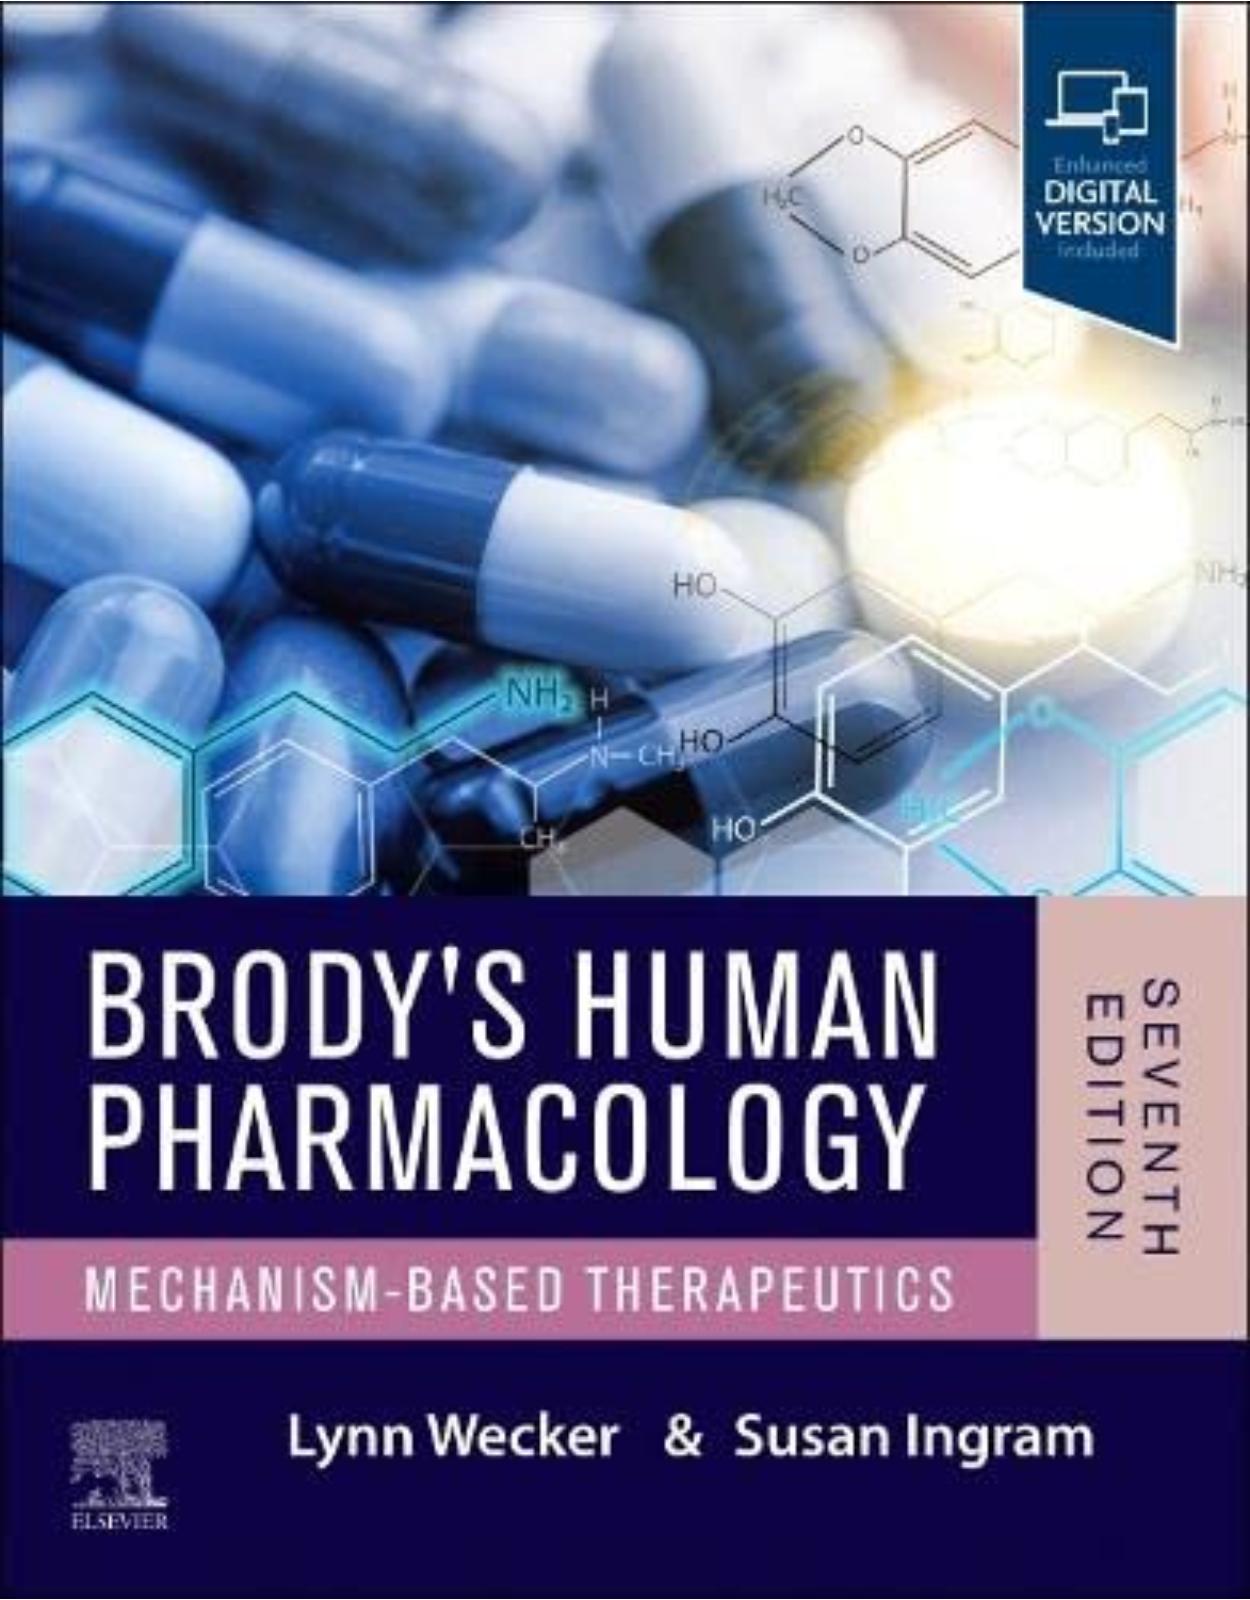 Brodys Human Pharmacology: Mechanism-Based Therapeutics